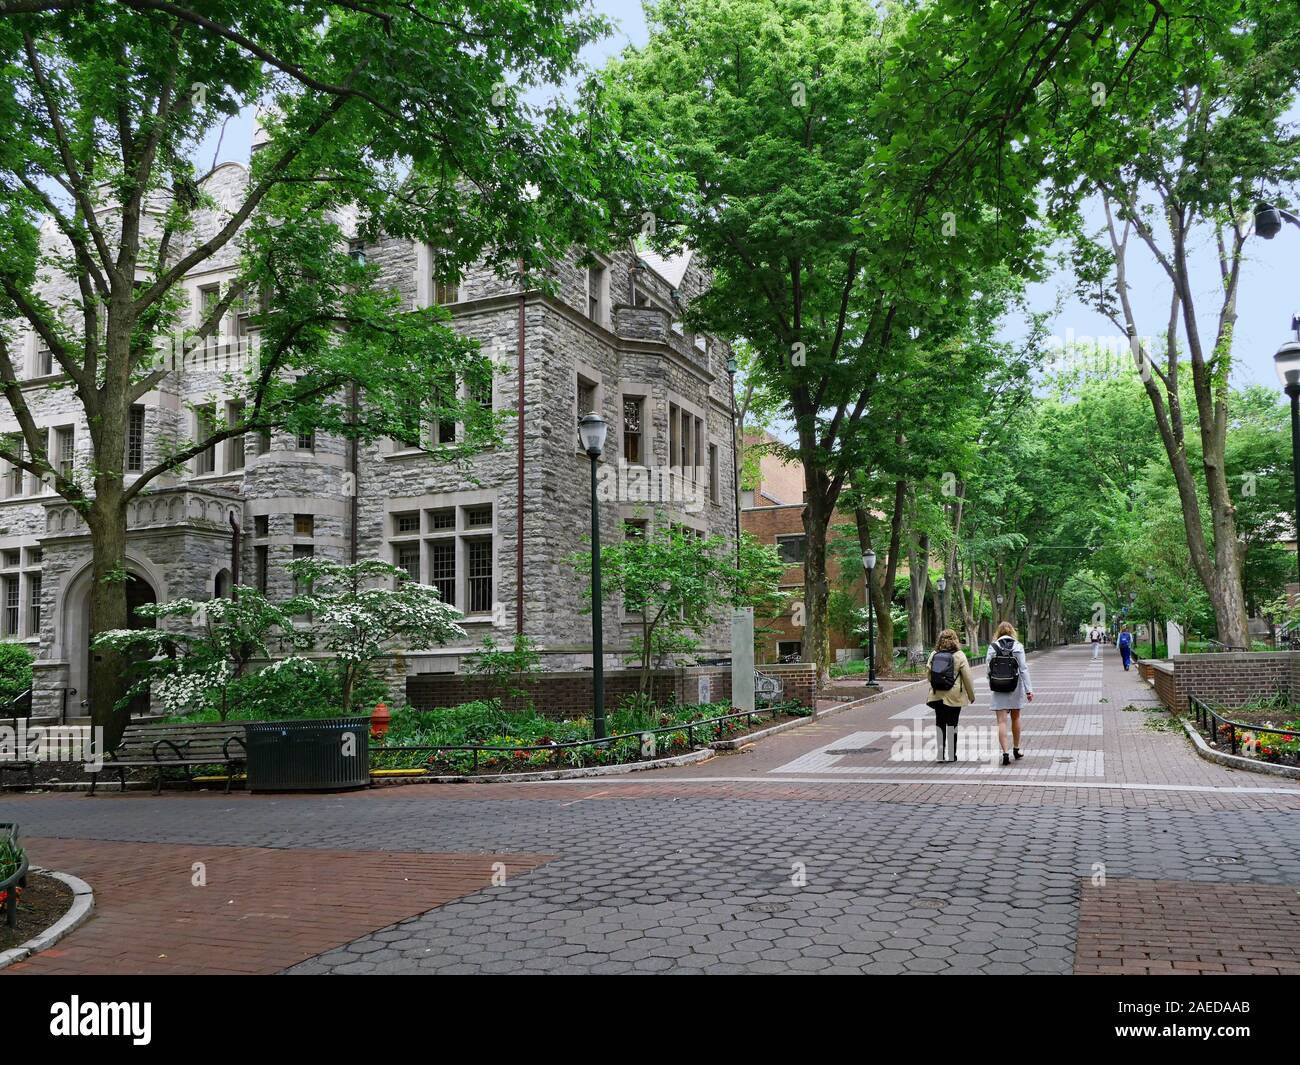 University of Pennsylvania campus is very green and shady, as seen in this view along Locust Walk. Stock Photo